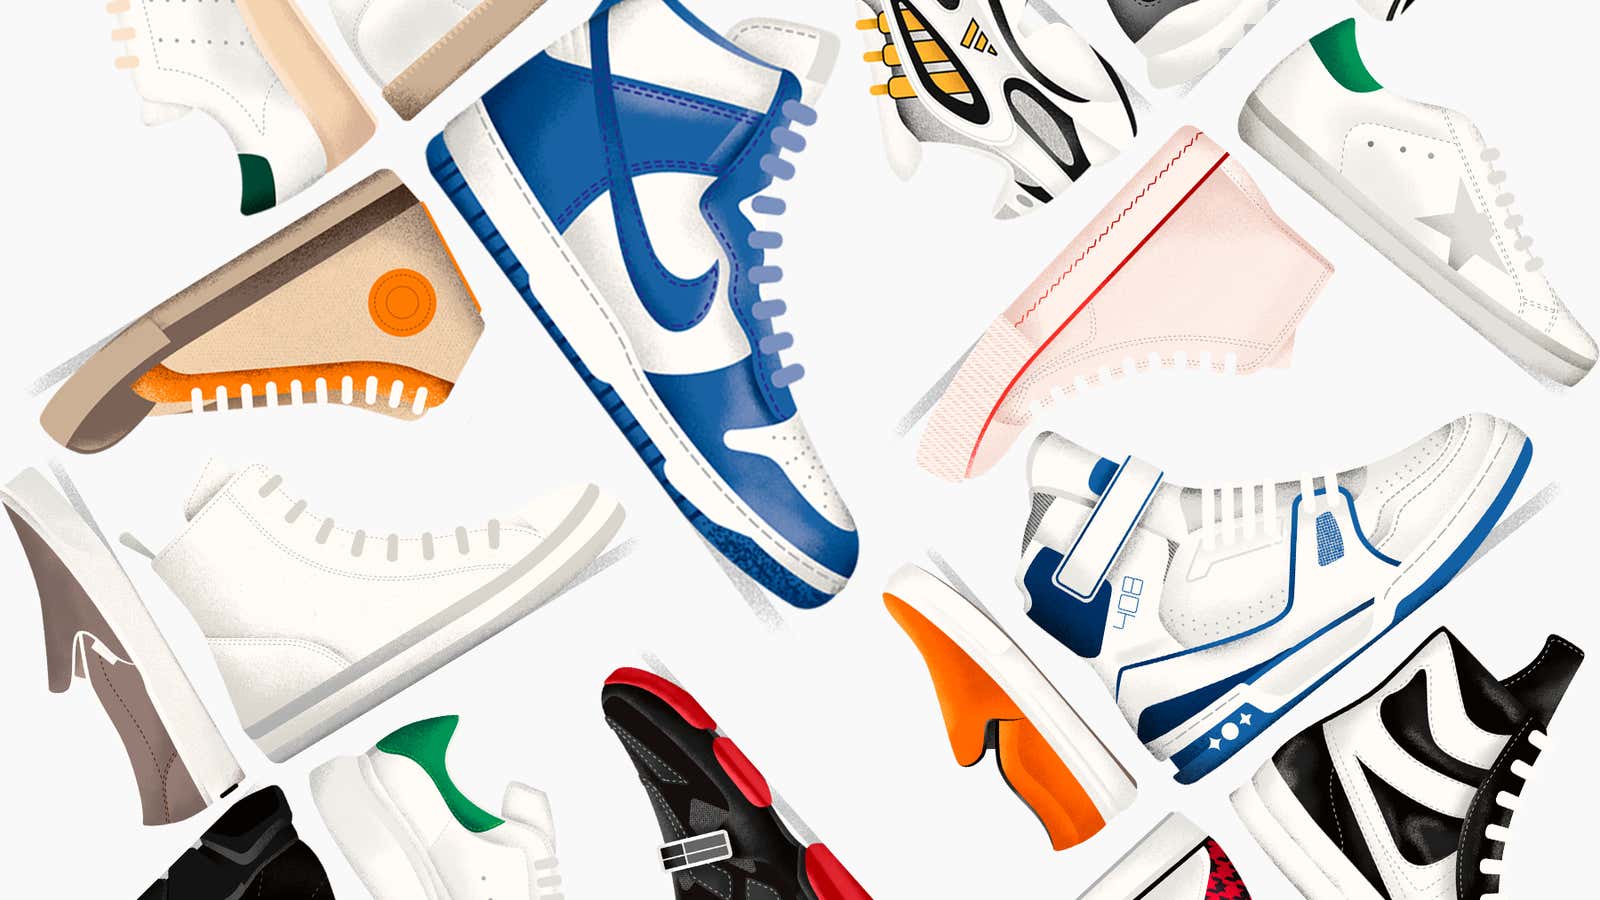 These sneaker silhouettes have redefined what we consider to be luxury fashion